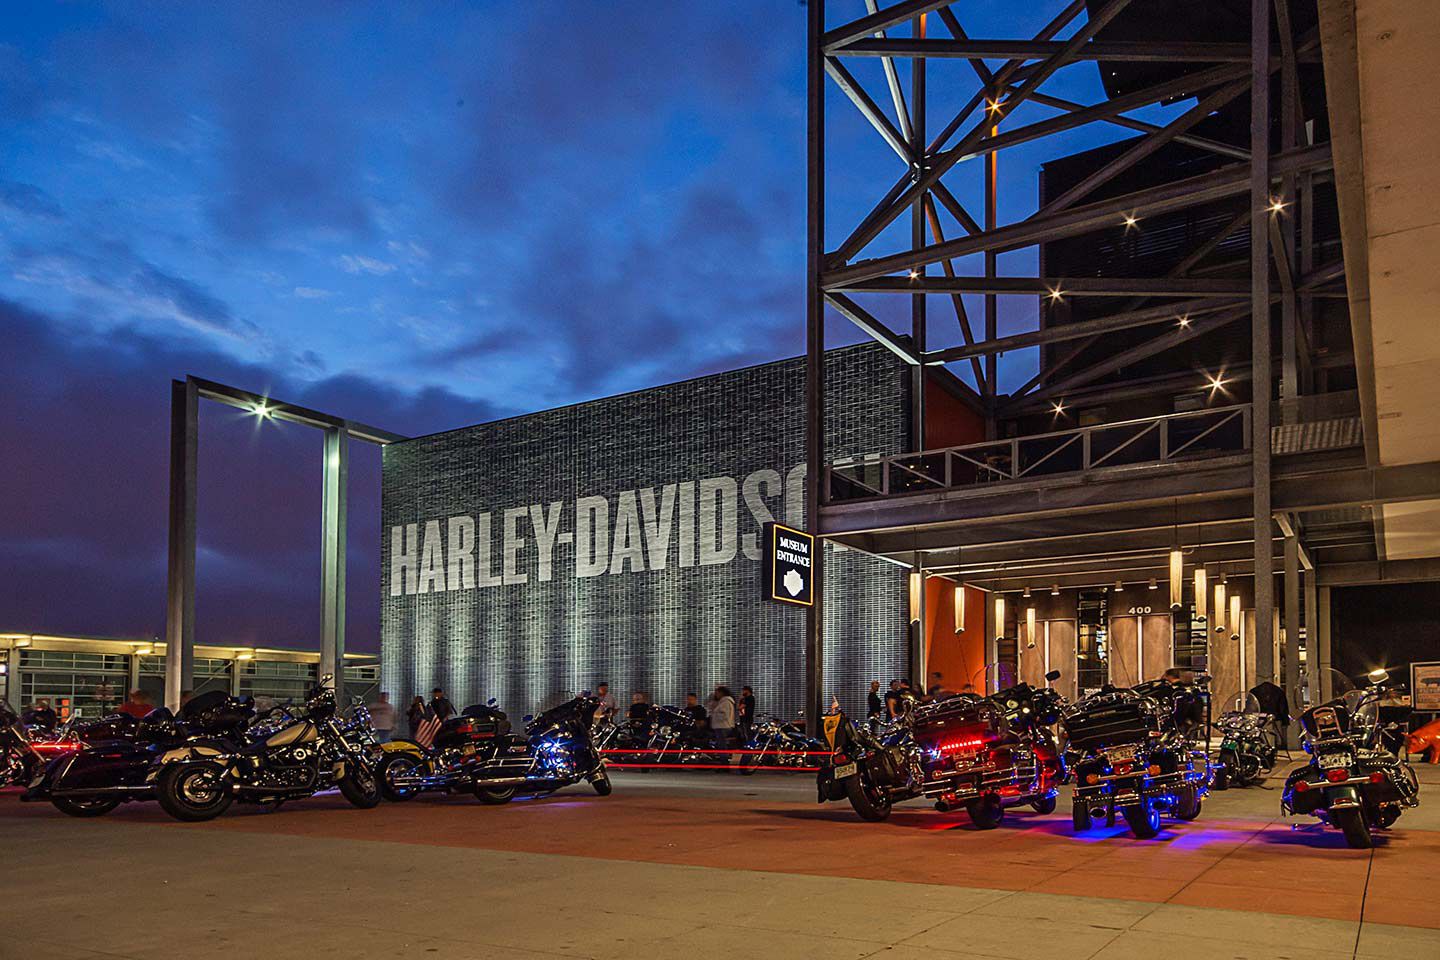 All of the routes lead to the 2023 Harley Homecoming, with each ride slated for a July 12 arrival in Milwaukee. The Harley Davidson Museum is just one of the venues scheduled to host events during the festival.